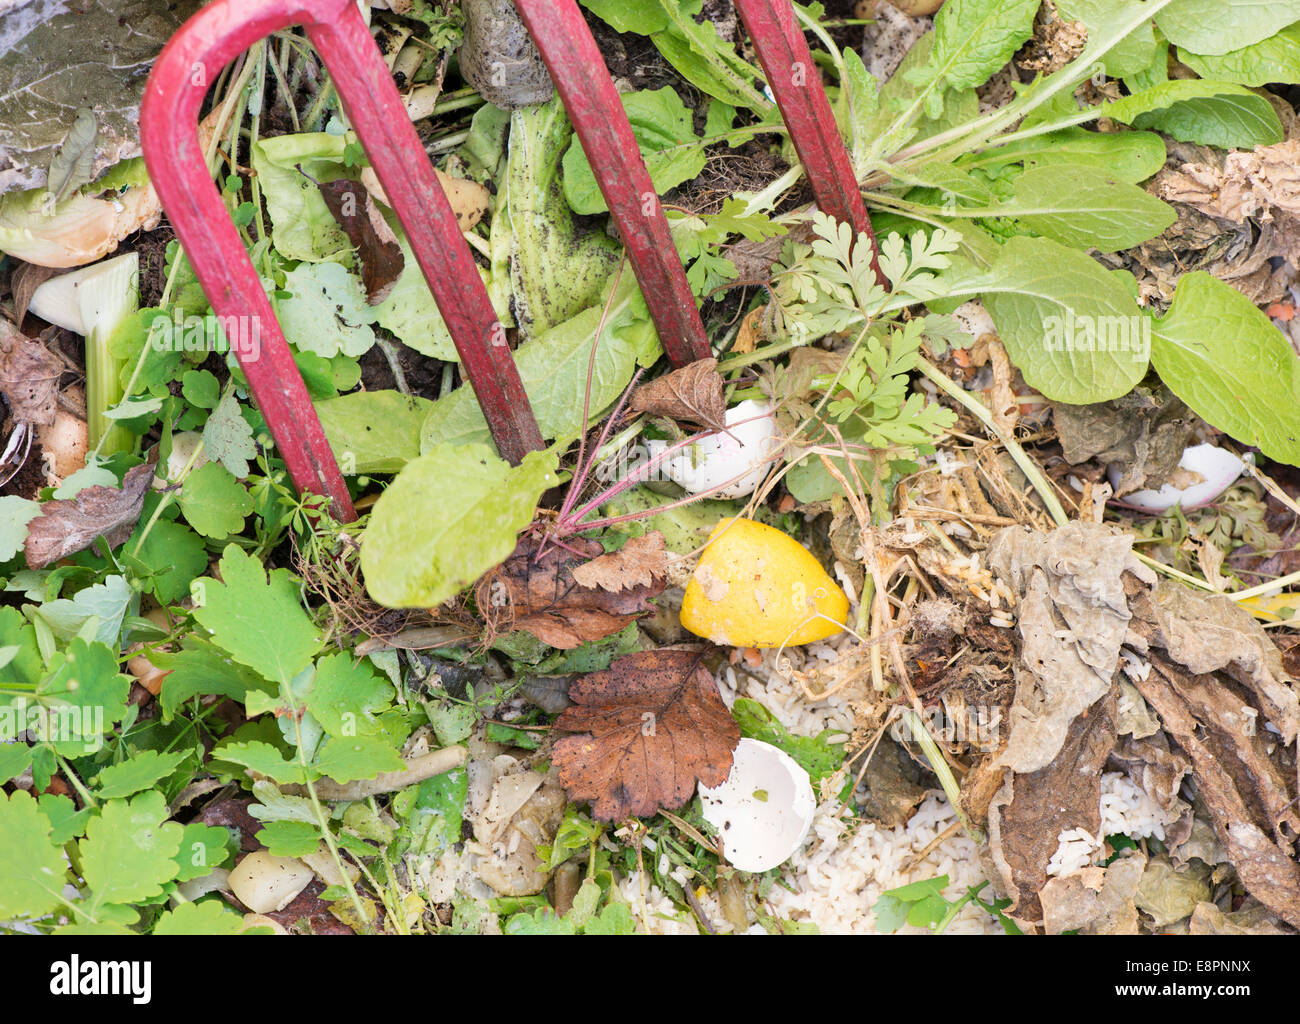 Close up of compost bin in garden filled with plant waste Stock Photo